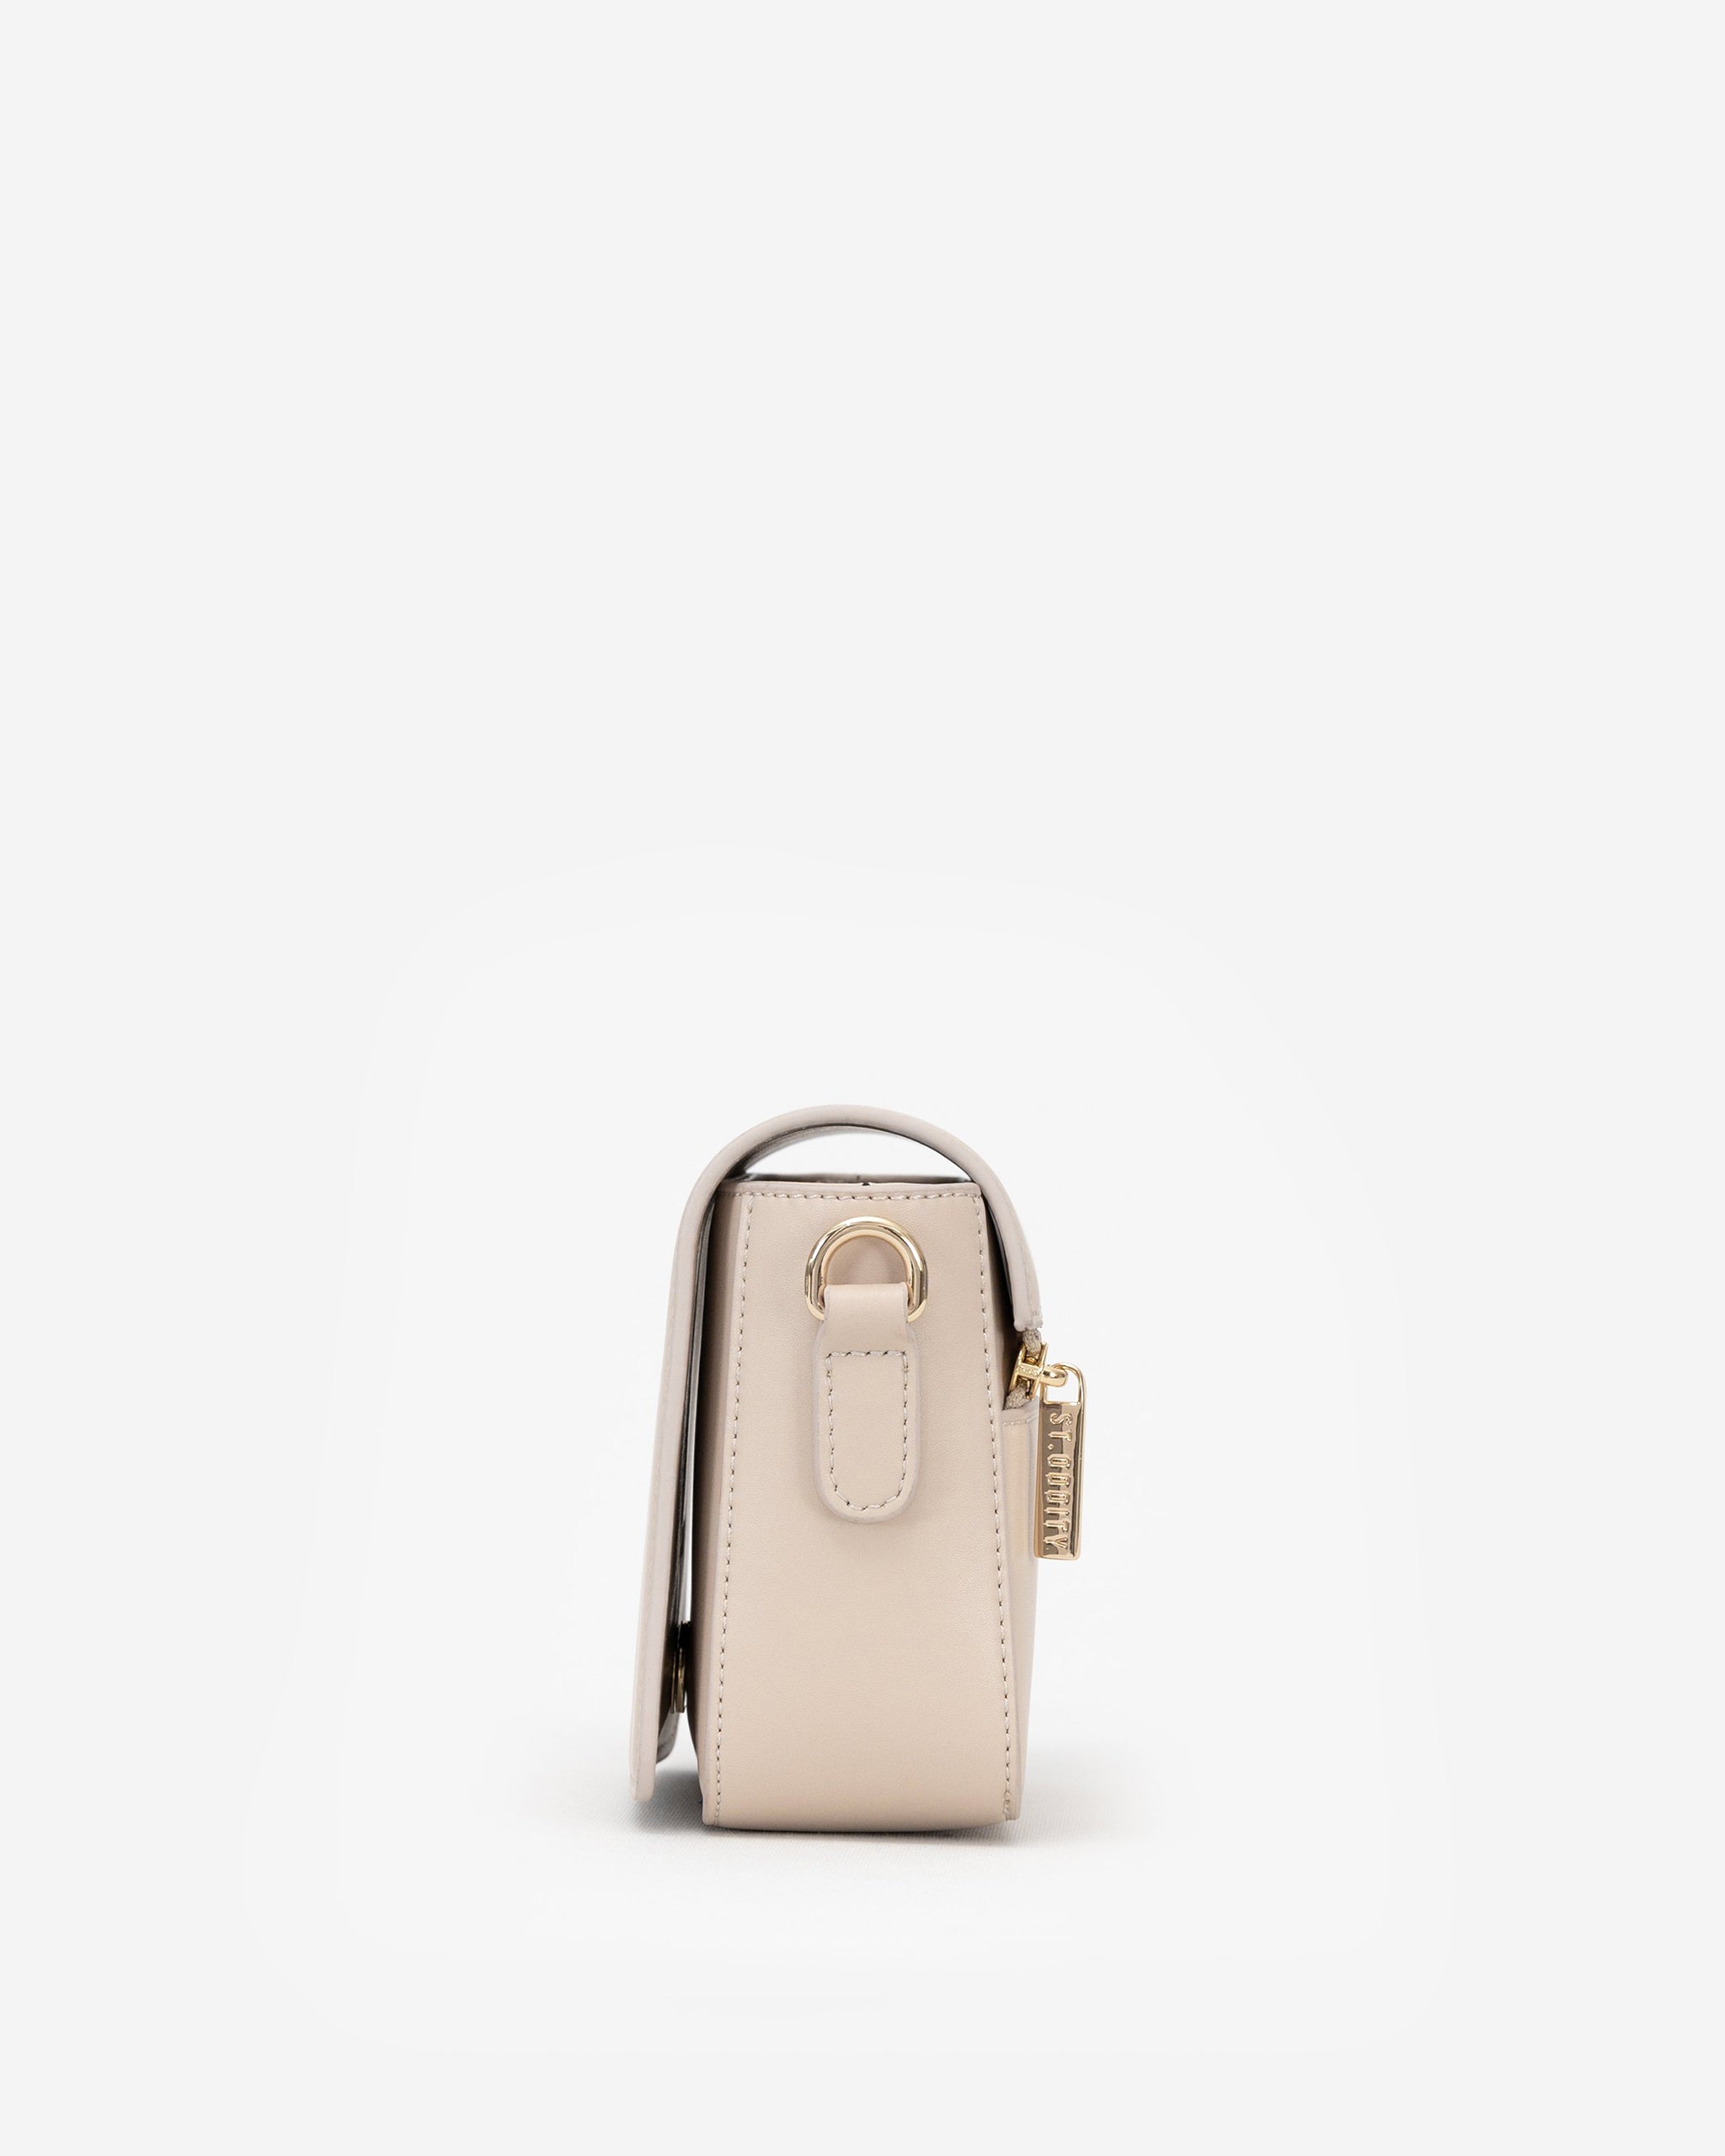 Crossbody Bag with Street Strap in Light Sand